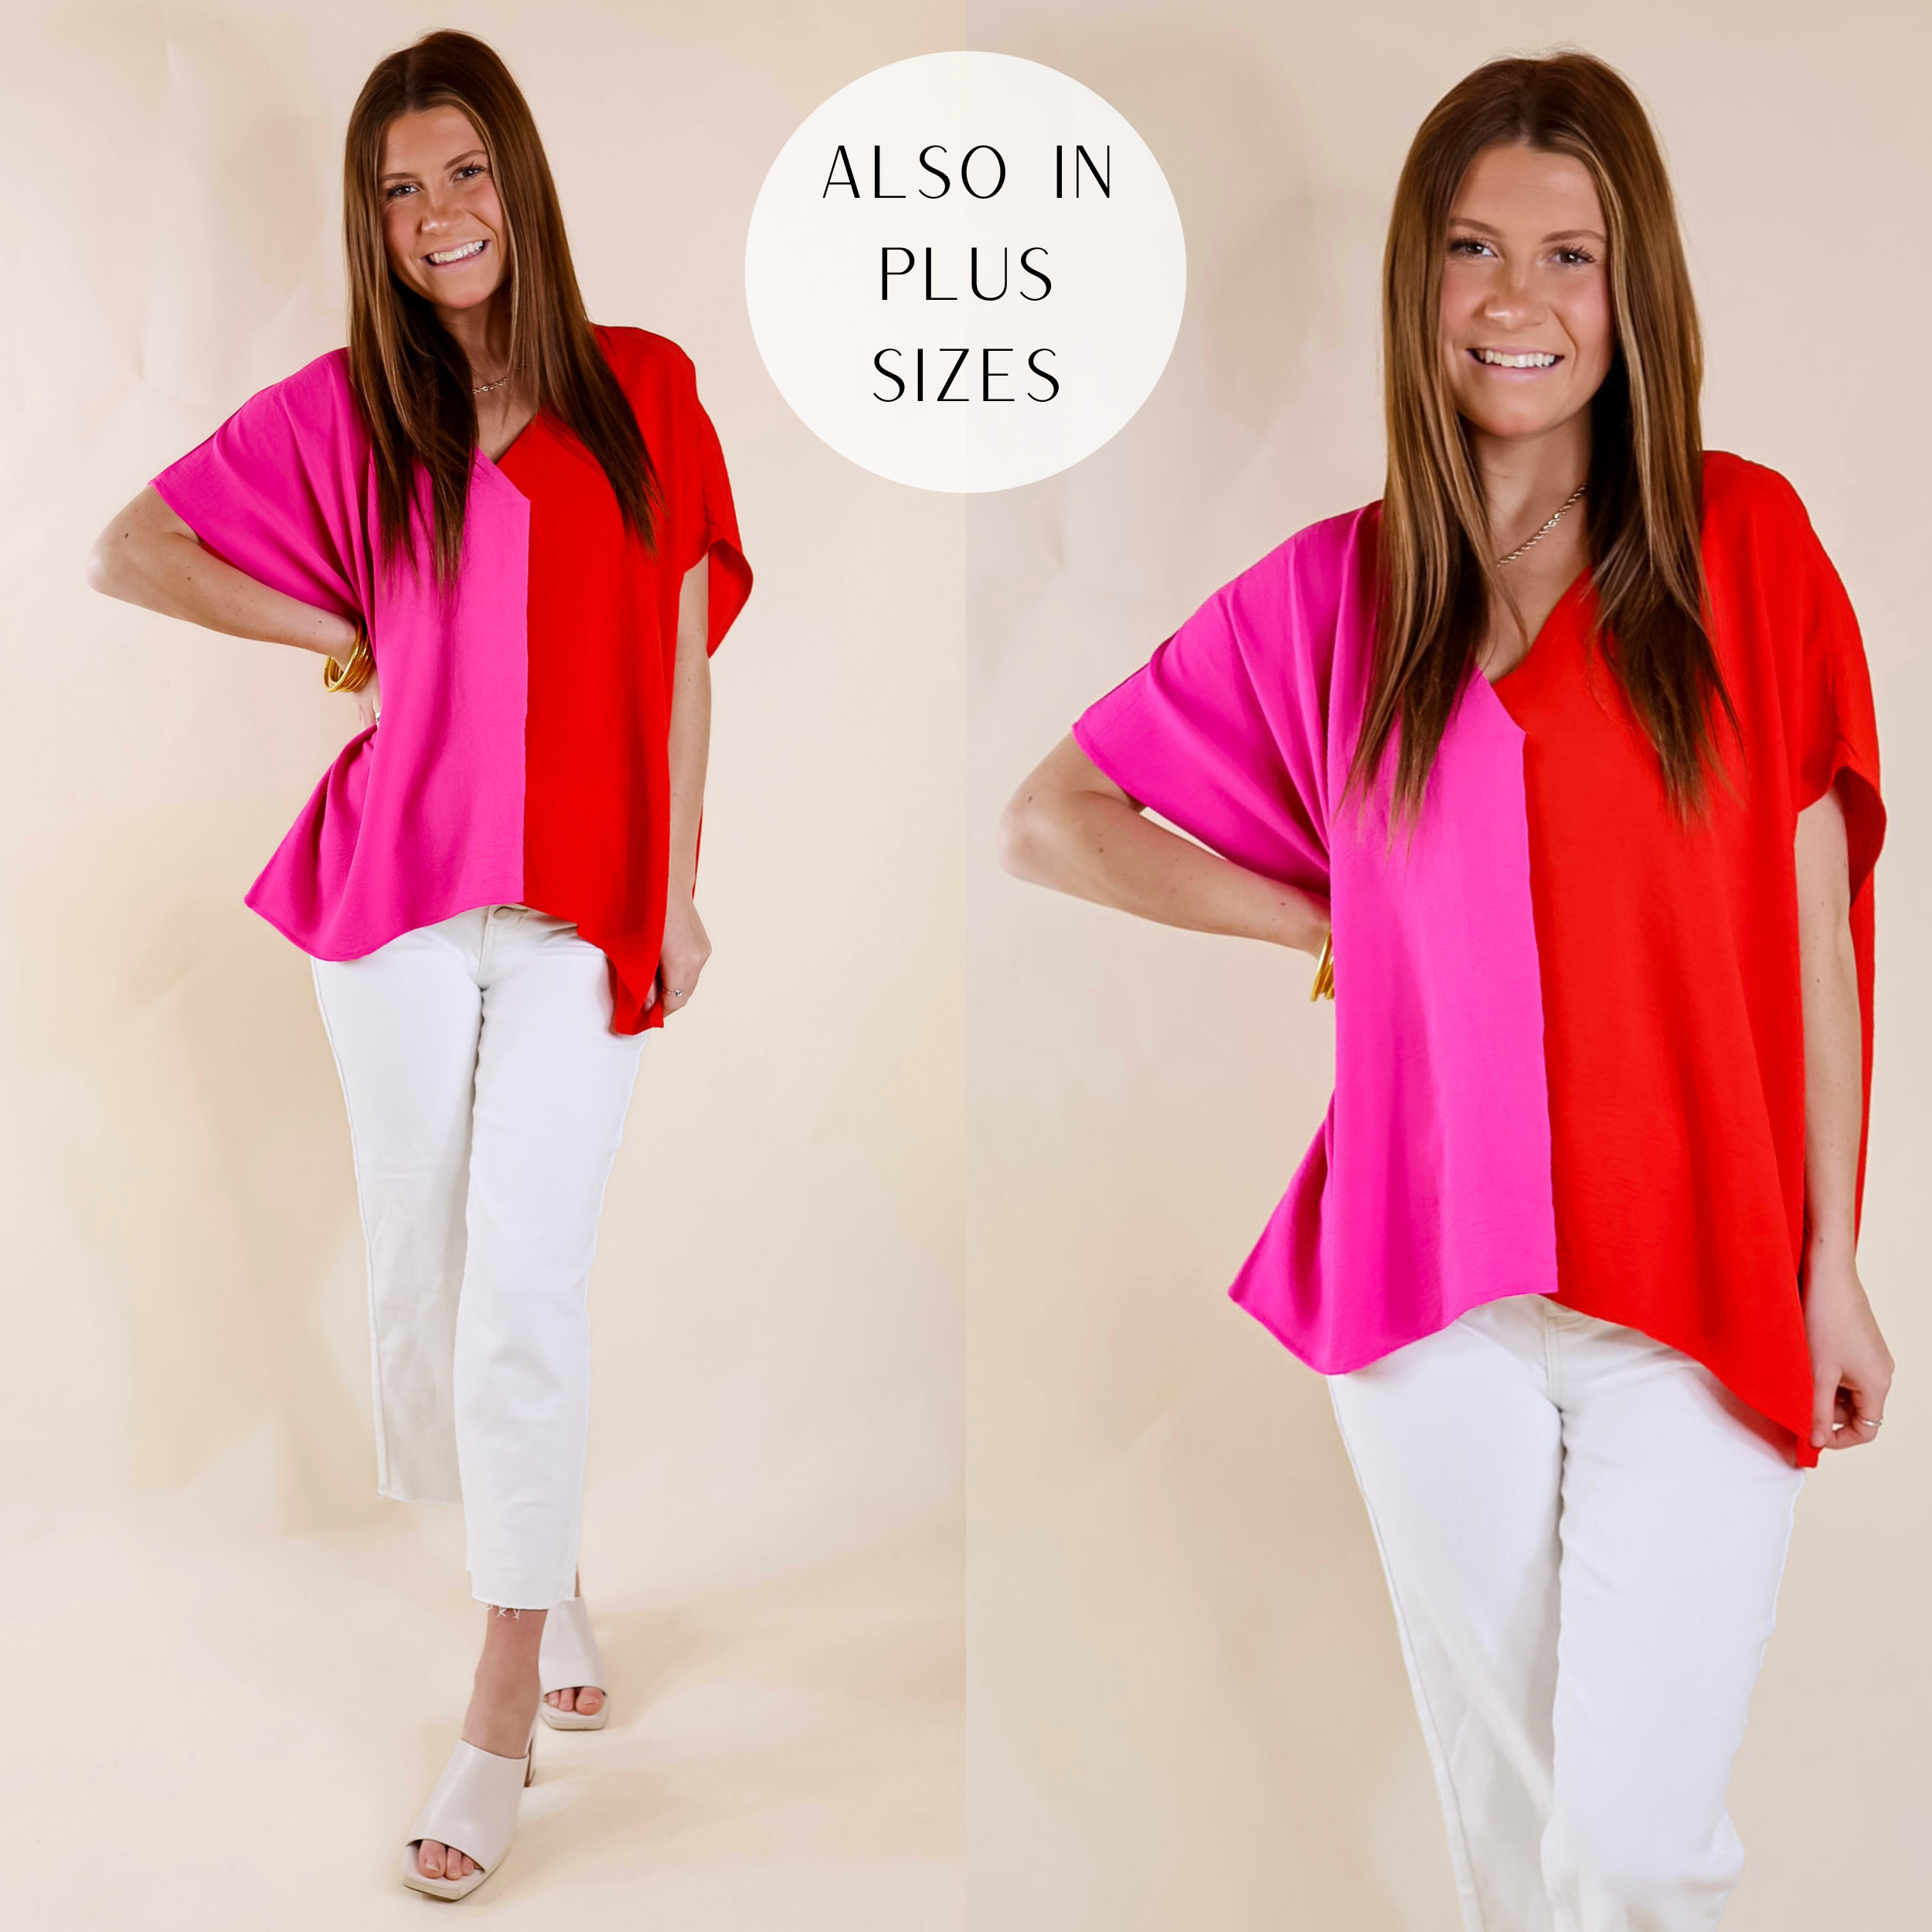 A short sleeve V neck split dye top with pink on the right and red on the left and a loose flowy fit. Item is pictured on a plain white background.